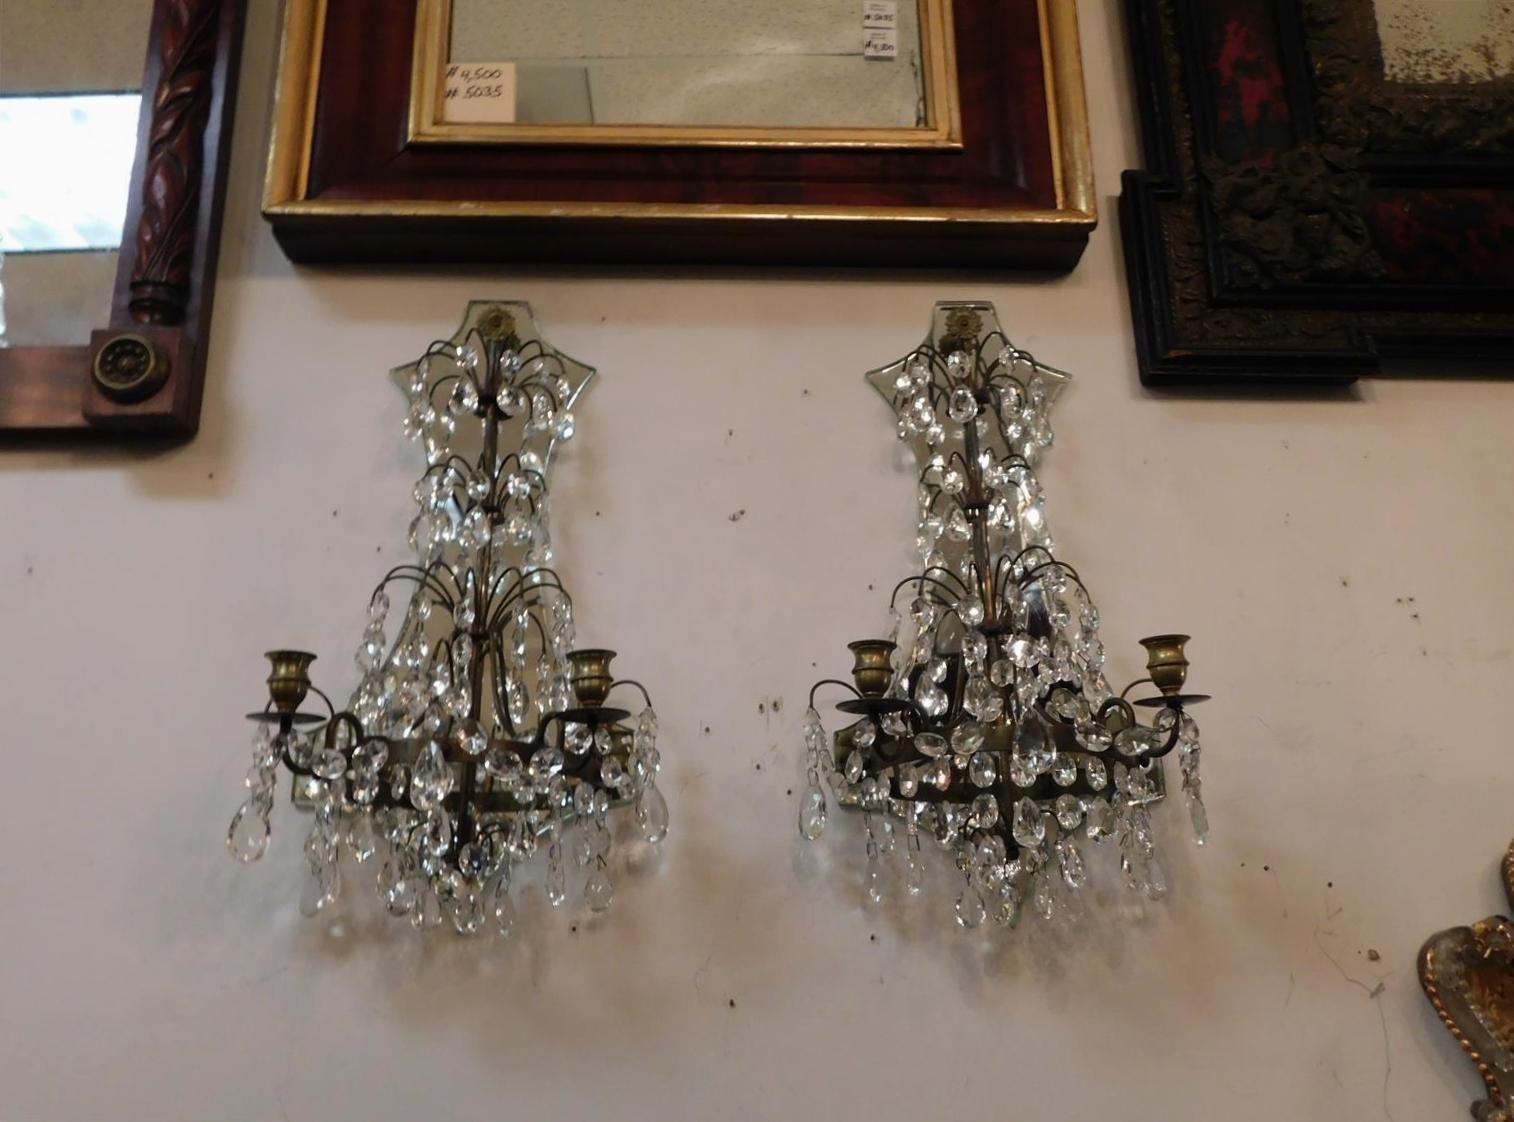 Pair of American bronze and crystal scrolled two arm mirrored wall sconces with flanking gilt foilate medallions. Sconces are candle powered but can be electrified if desired, Late 19th century.